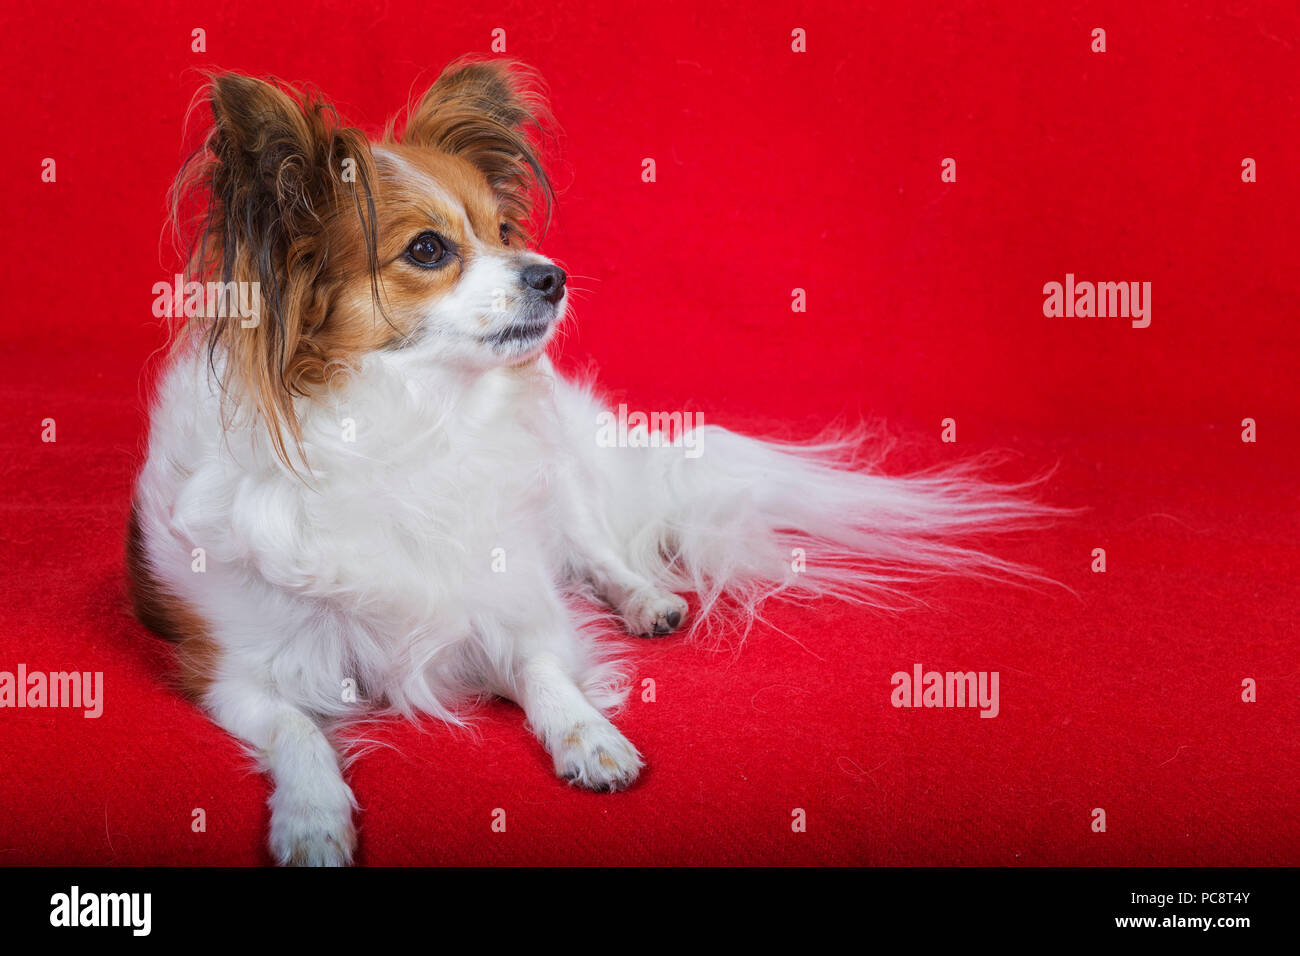 Dog papillon on a red background. Stock Photo